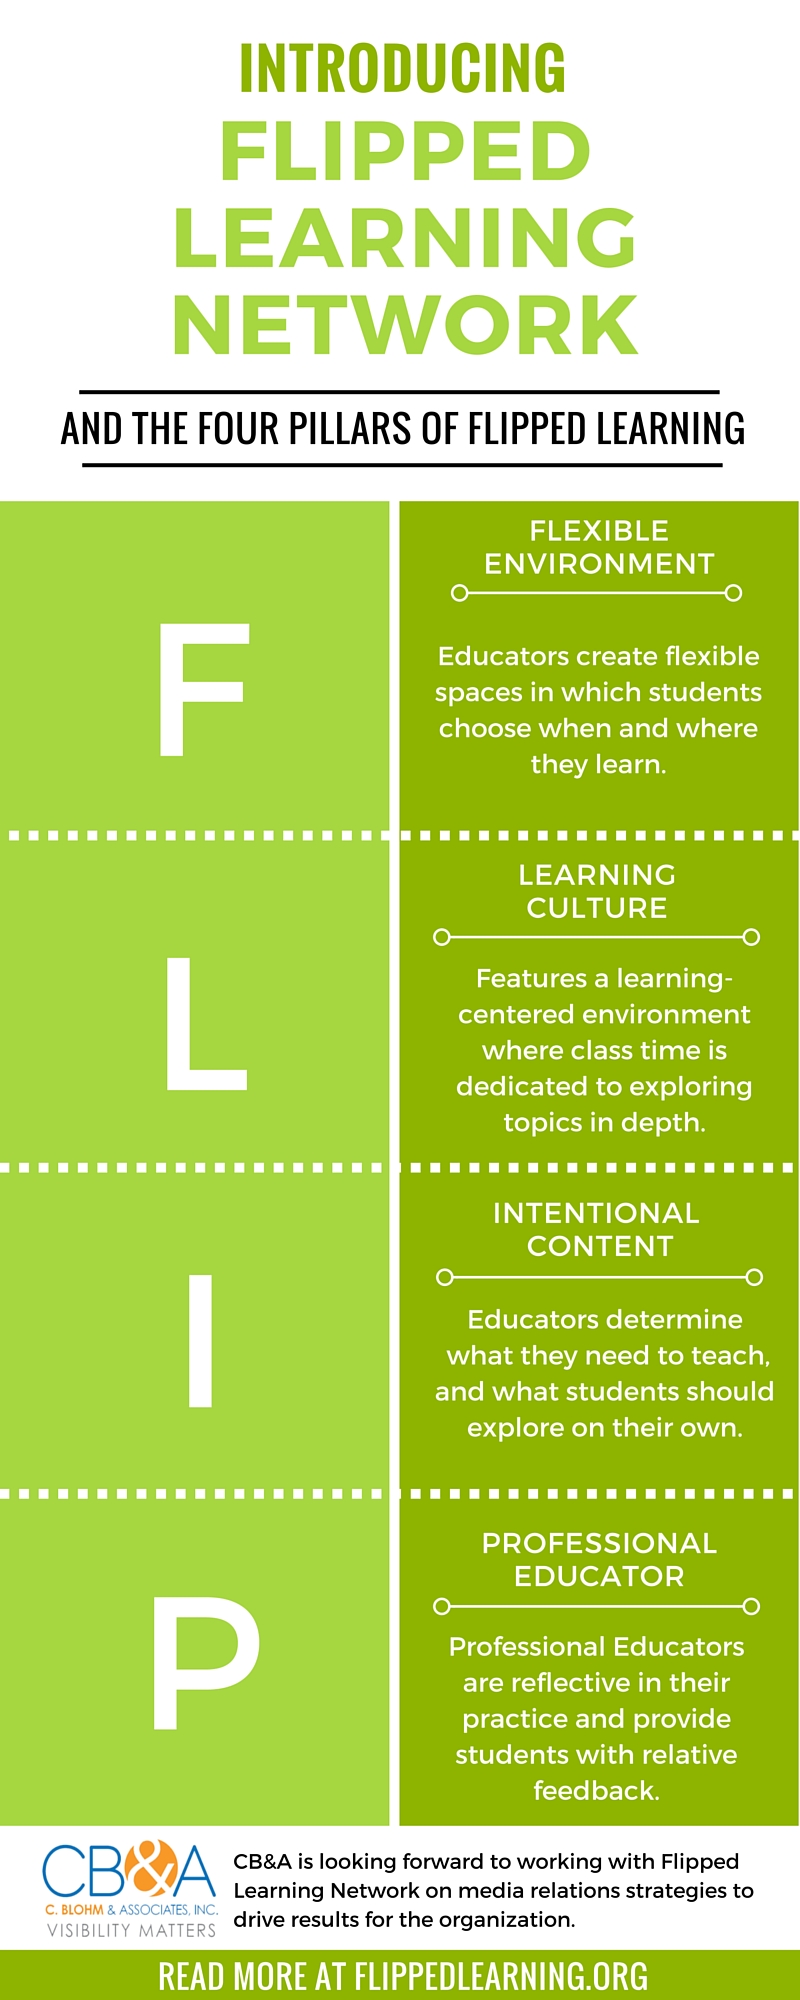 Flipped Learning Network